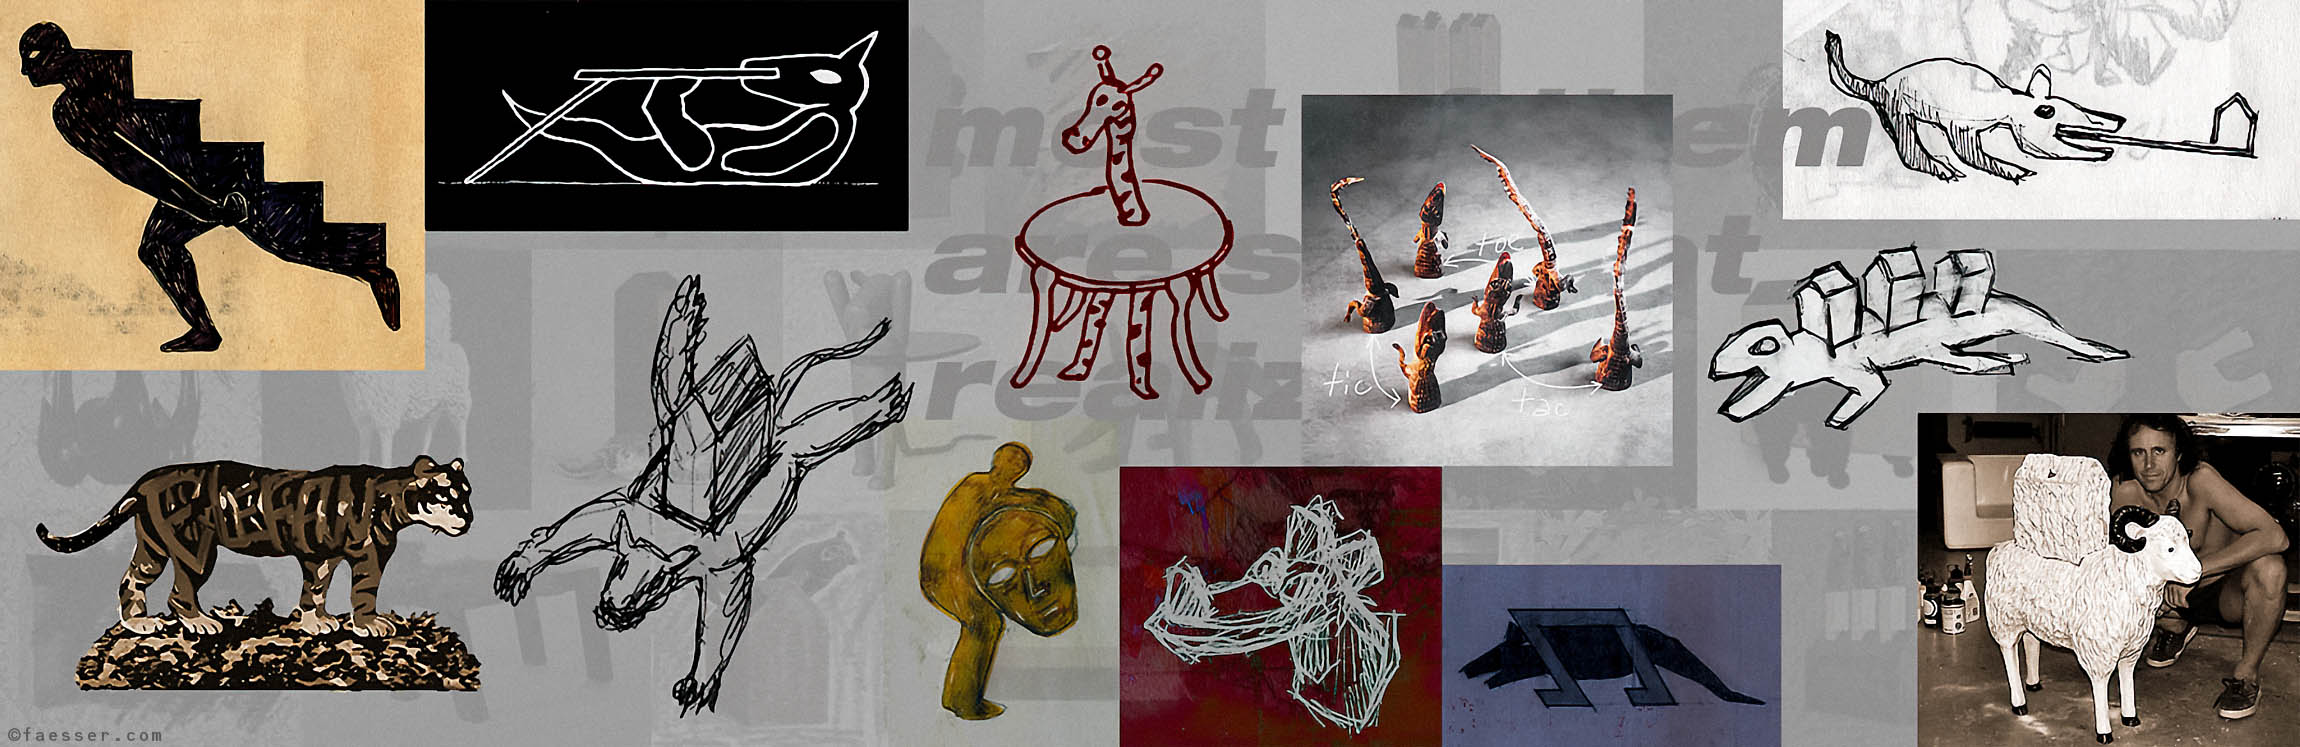 Many sketches and ideas for the next classic sculptures; artist Roland Faesser, sculptor and painter 2020